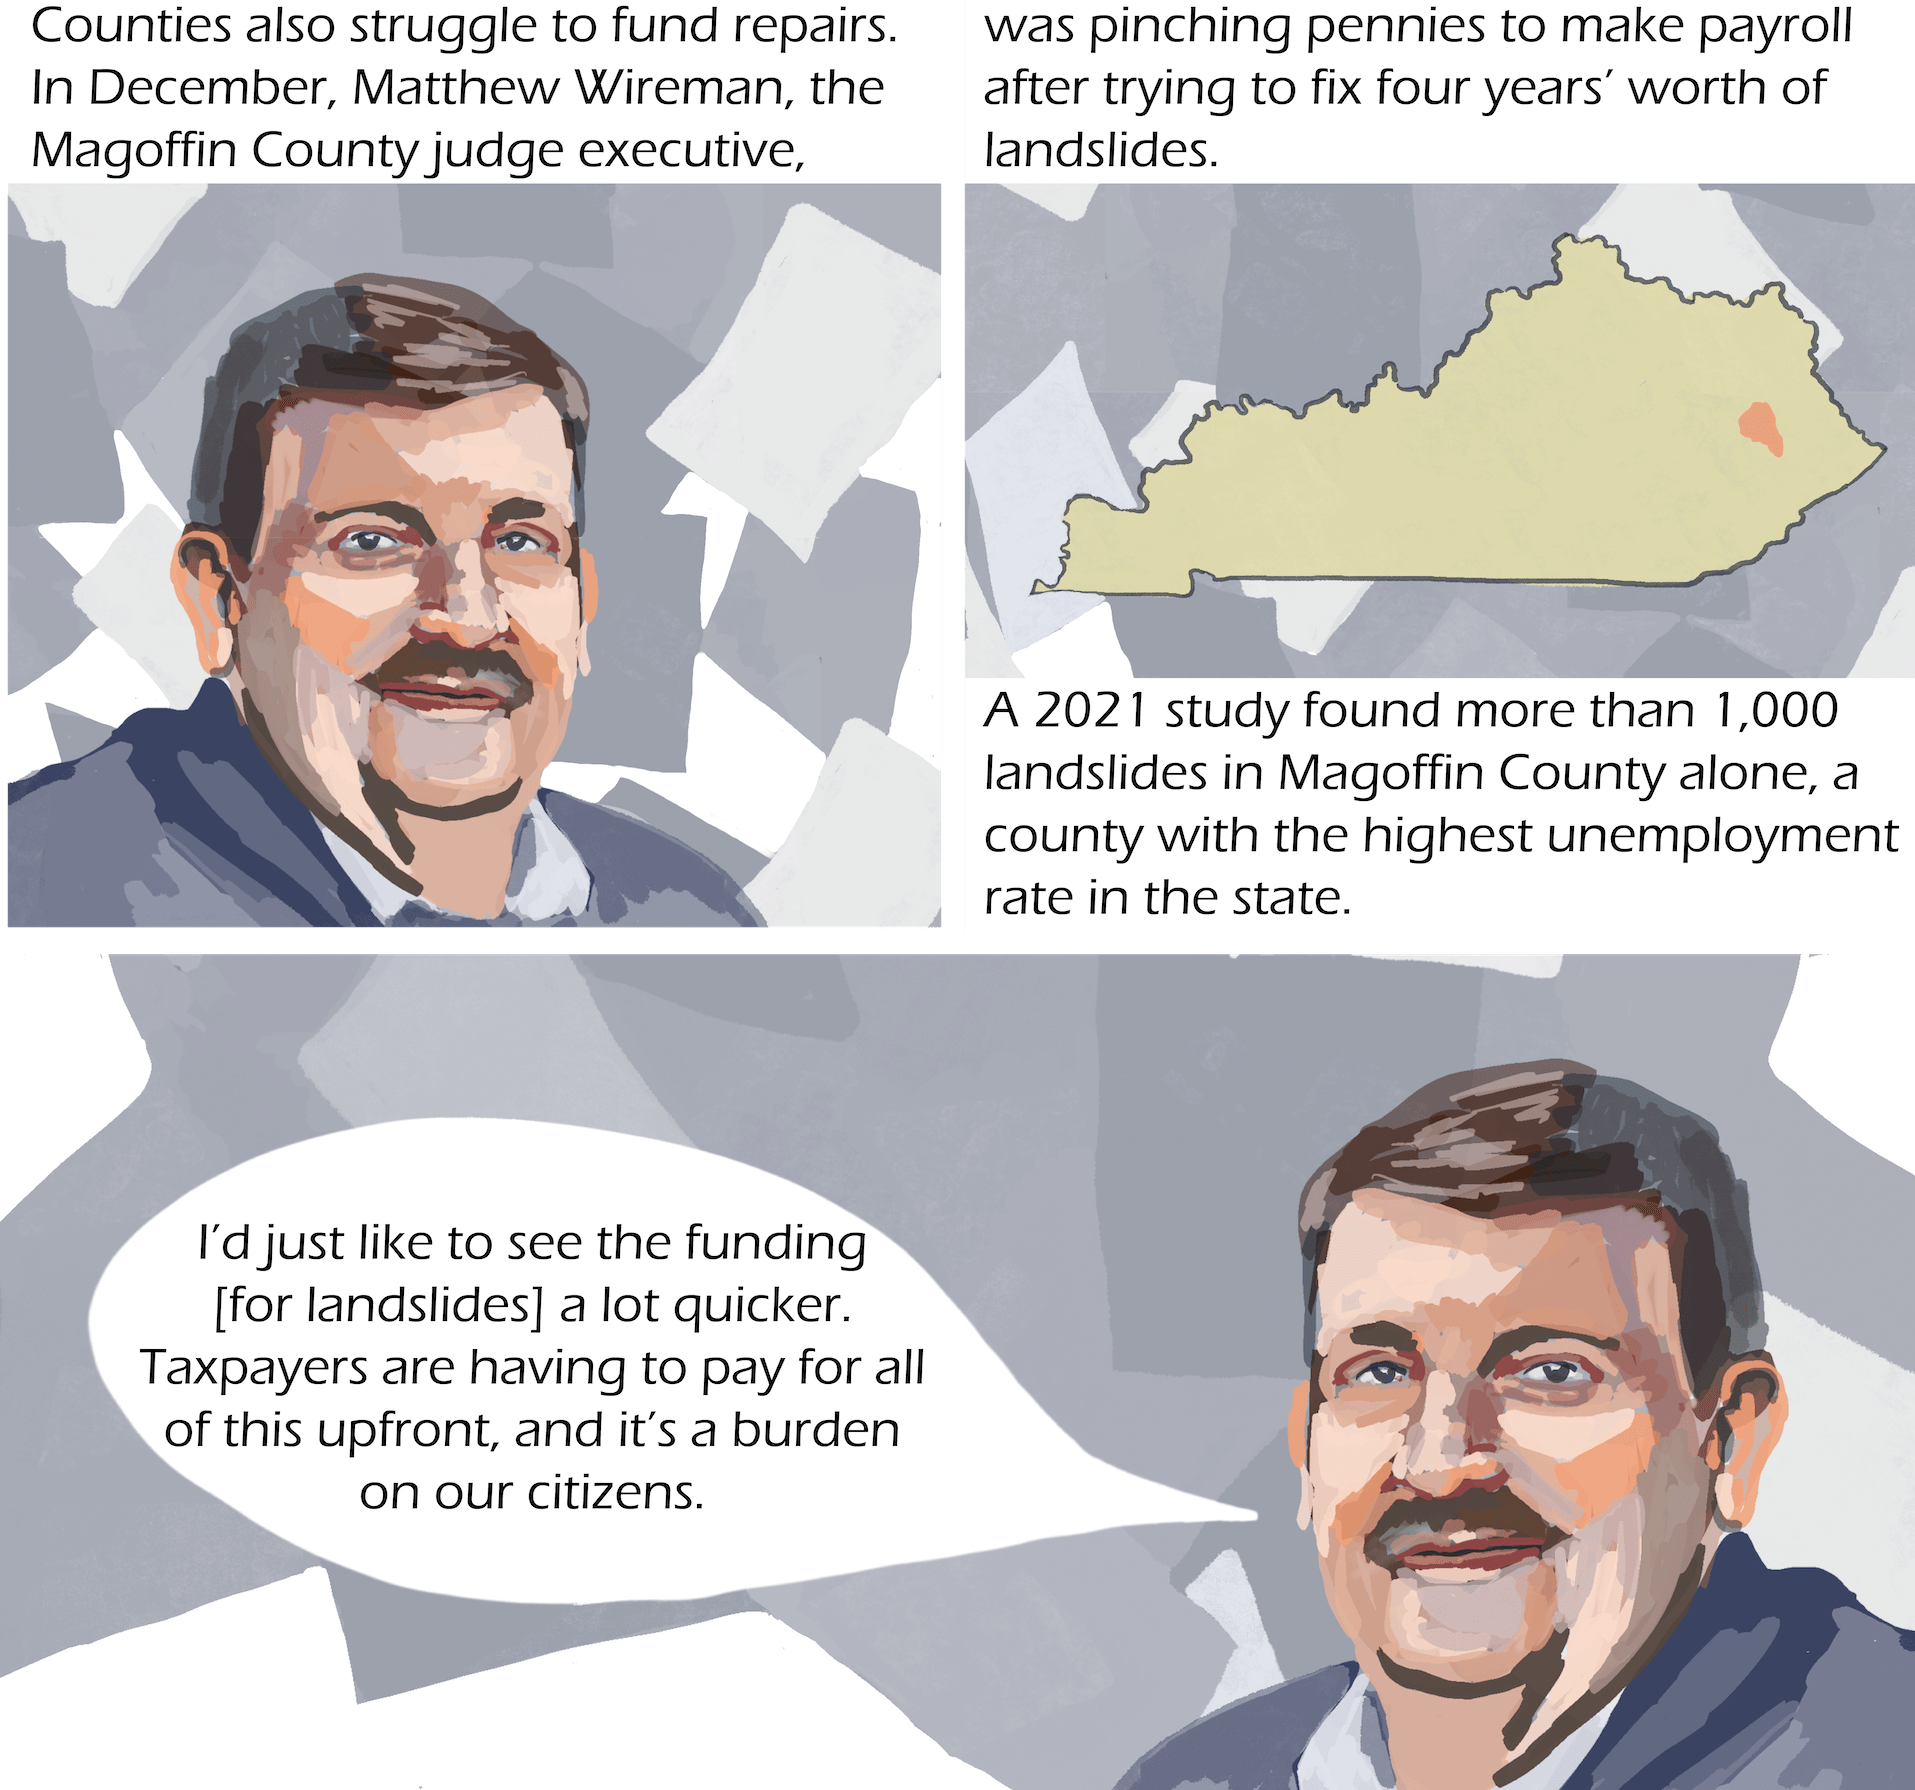 Three images: a man with a moustache in panels one and three, in panel two an outline of the state of Kentucky. Text: Counties also struggle to fund repairs. In December, Matthew Wireman, the Magoffin County judge executive, was pinching pennies to make payroll after trying to fix four years’ worth of landslides: A 2021 study found more than 1,000 landslides in Magoffin alone, a county with the highest unemployment rate in the state. Matthew Wireman: “I’d just like to see the funding [for landslides] a lot quicker. Taxpayers are having to pay for all of this upfront, and it’s a burden on our citizens.”